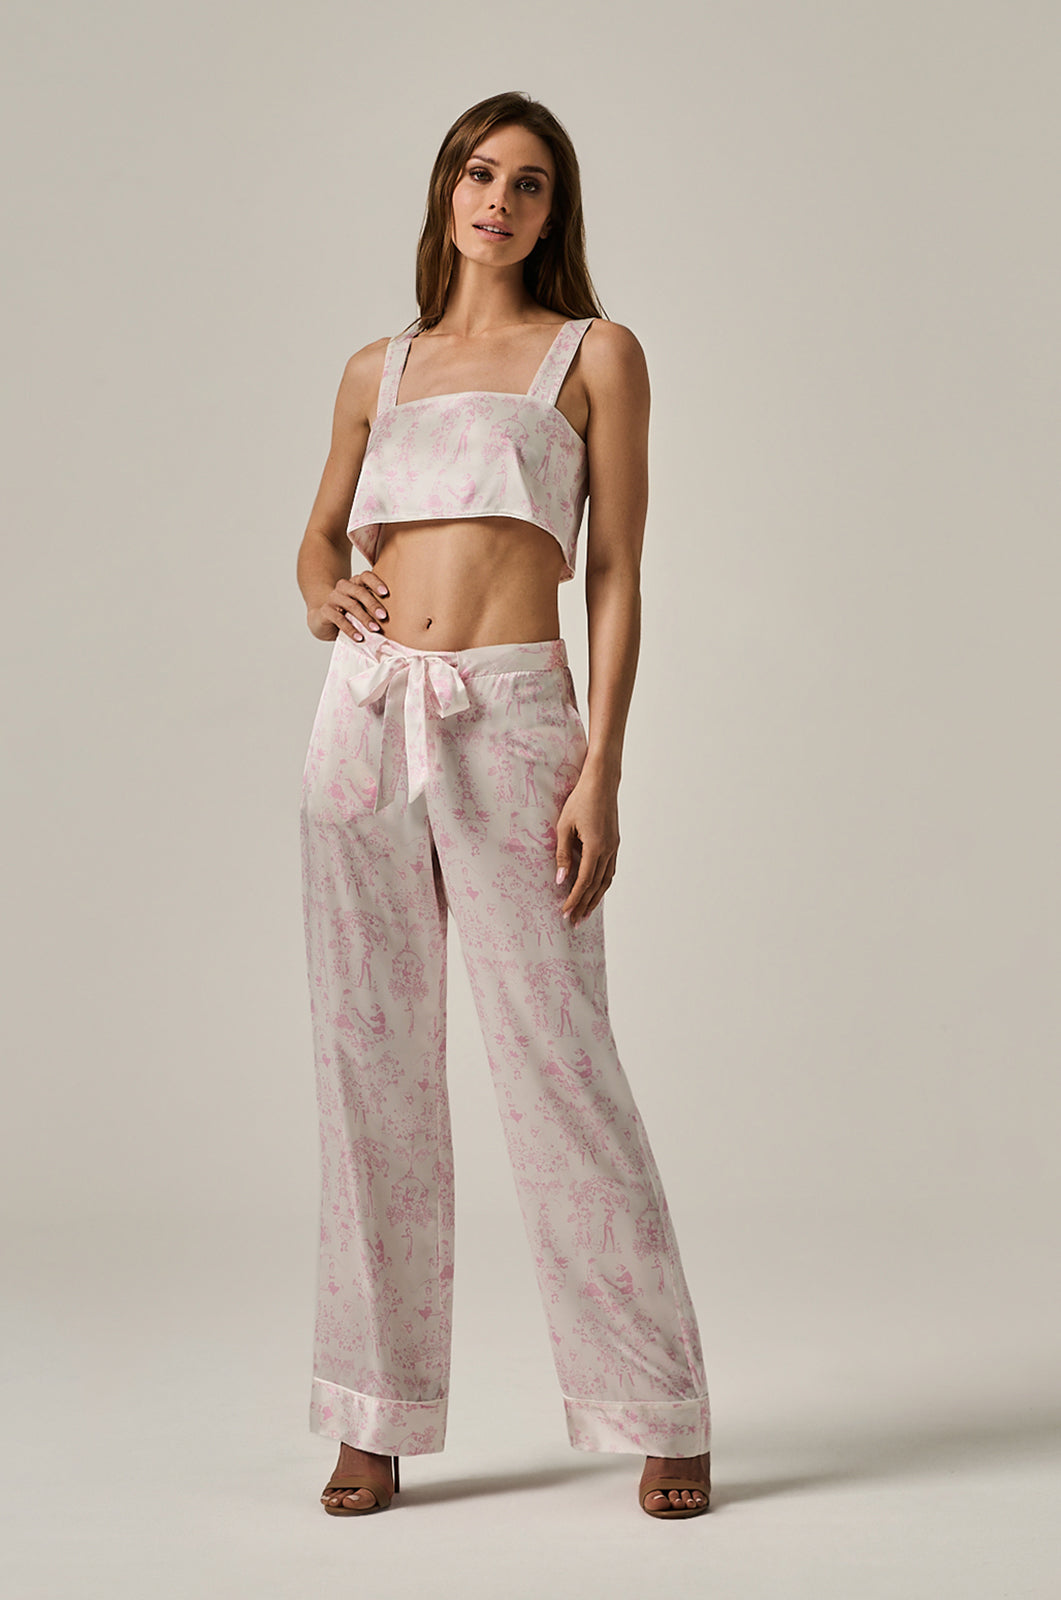 toile silk patterned long lounge tie up pant